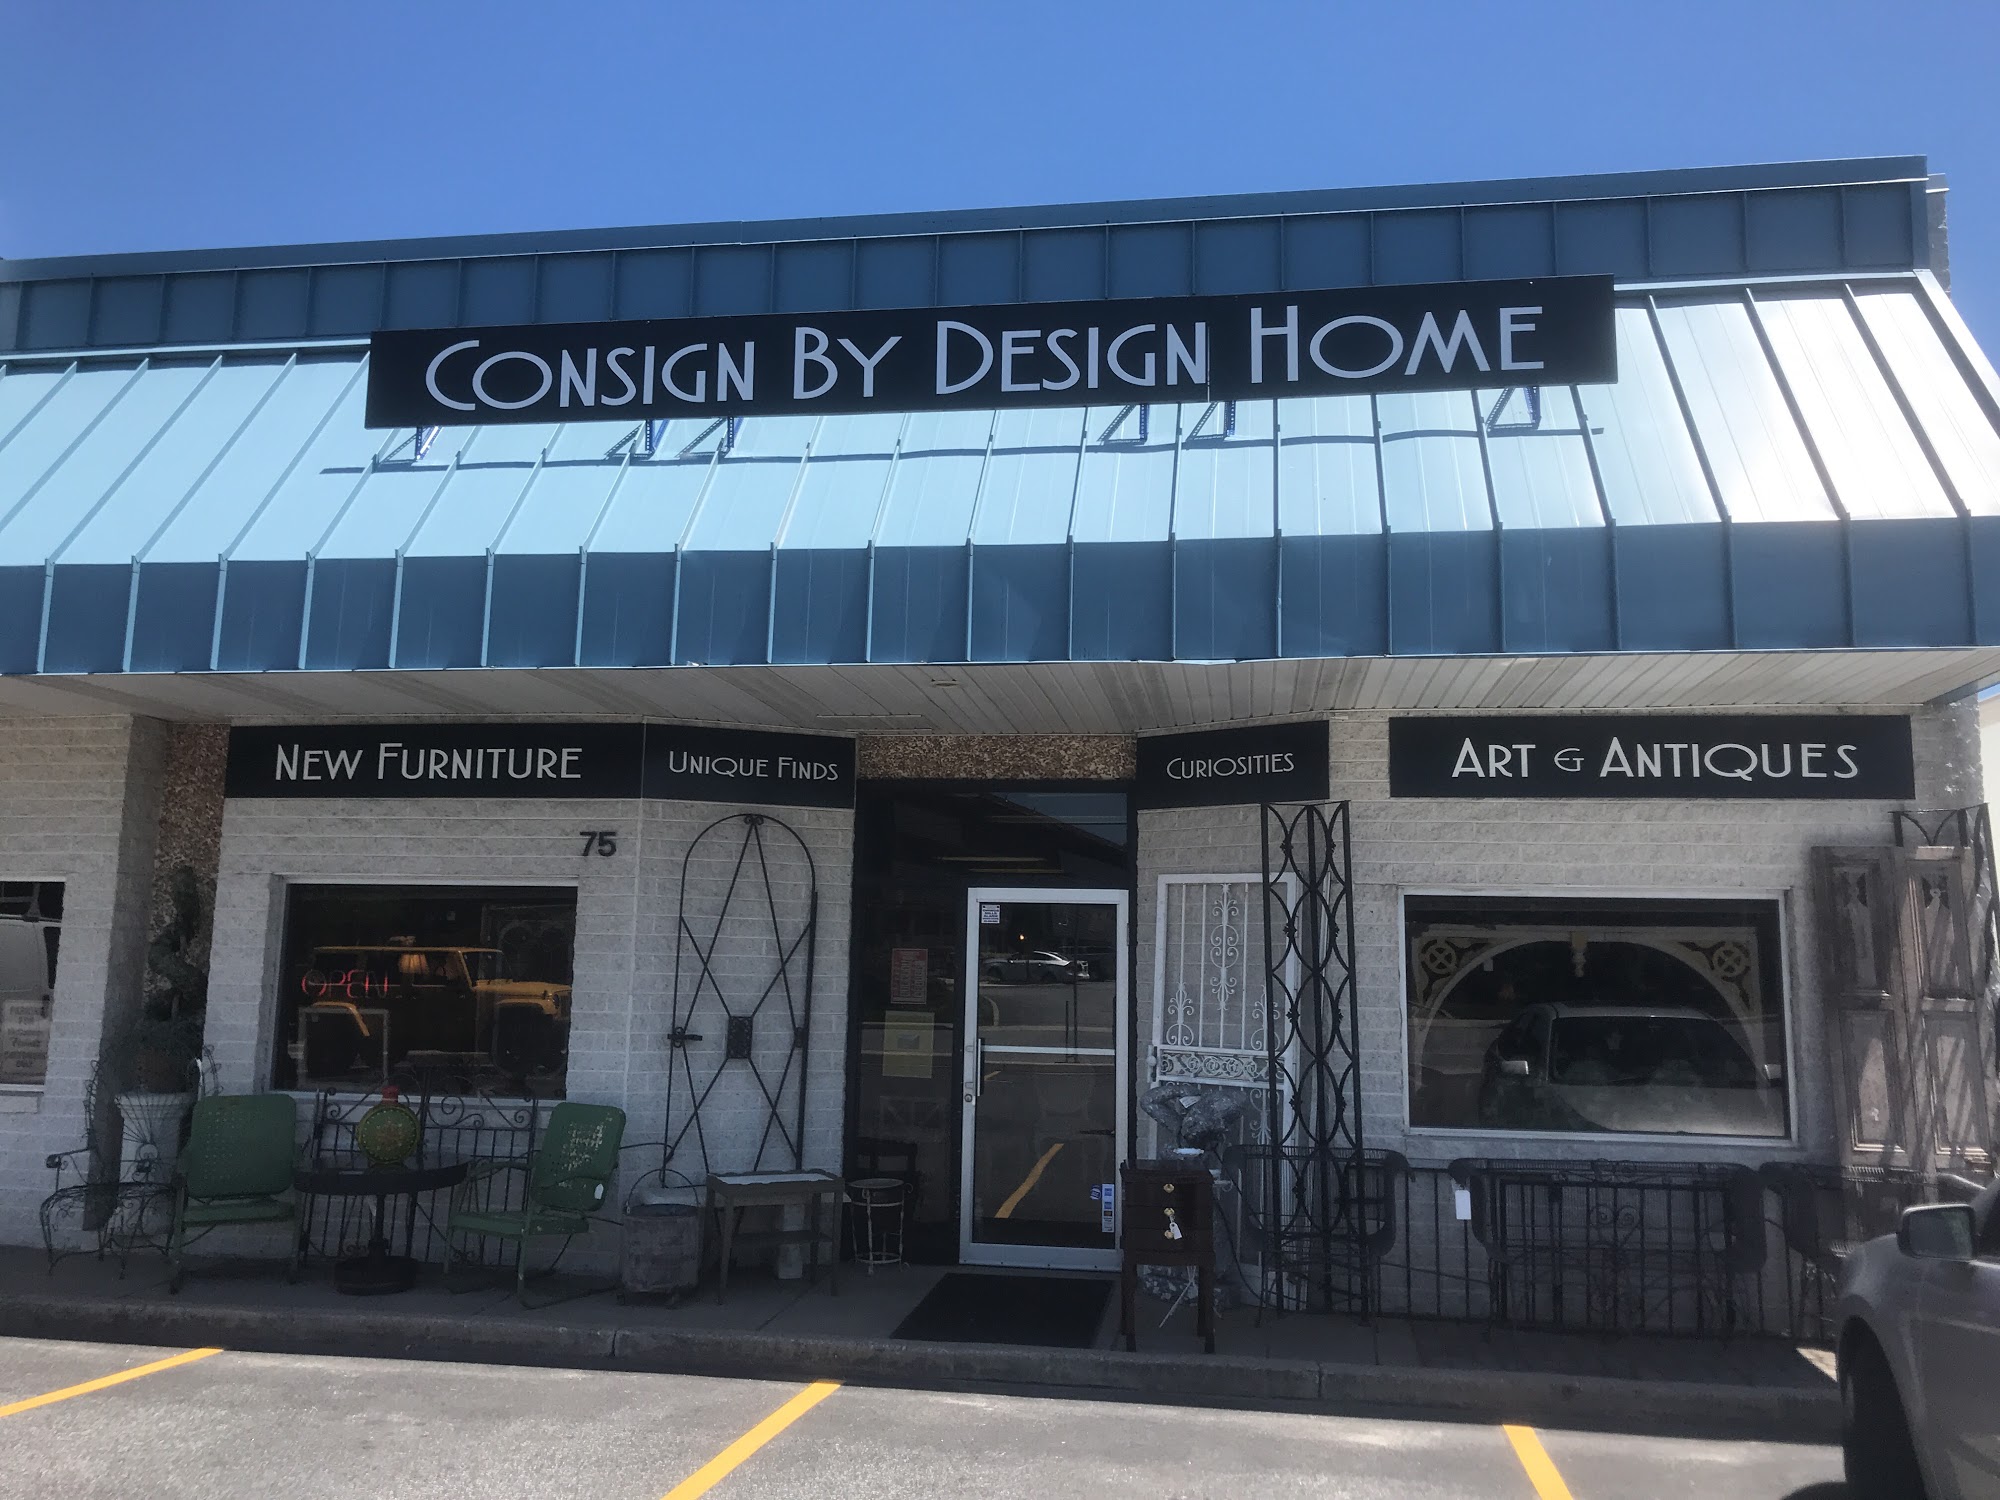 Consign By Design Home